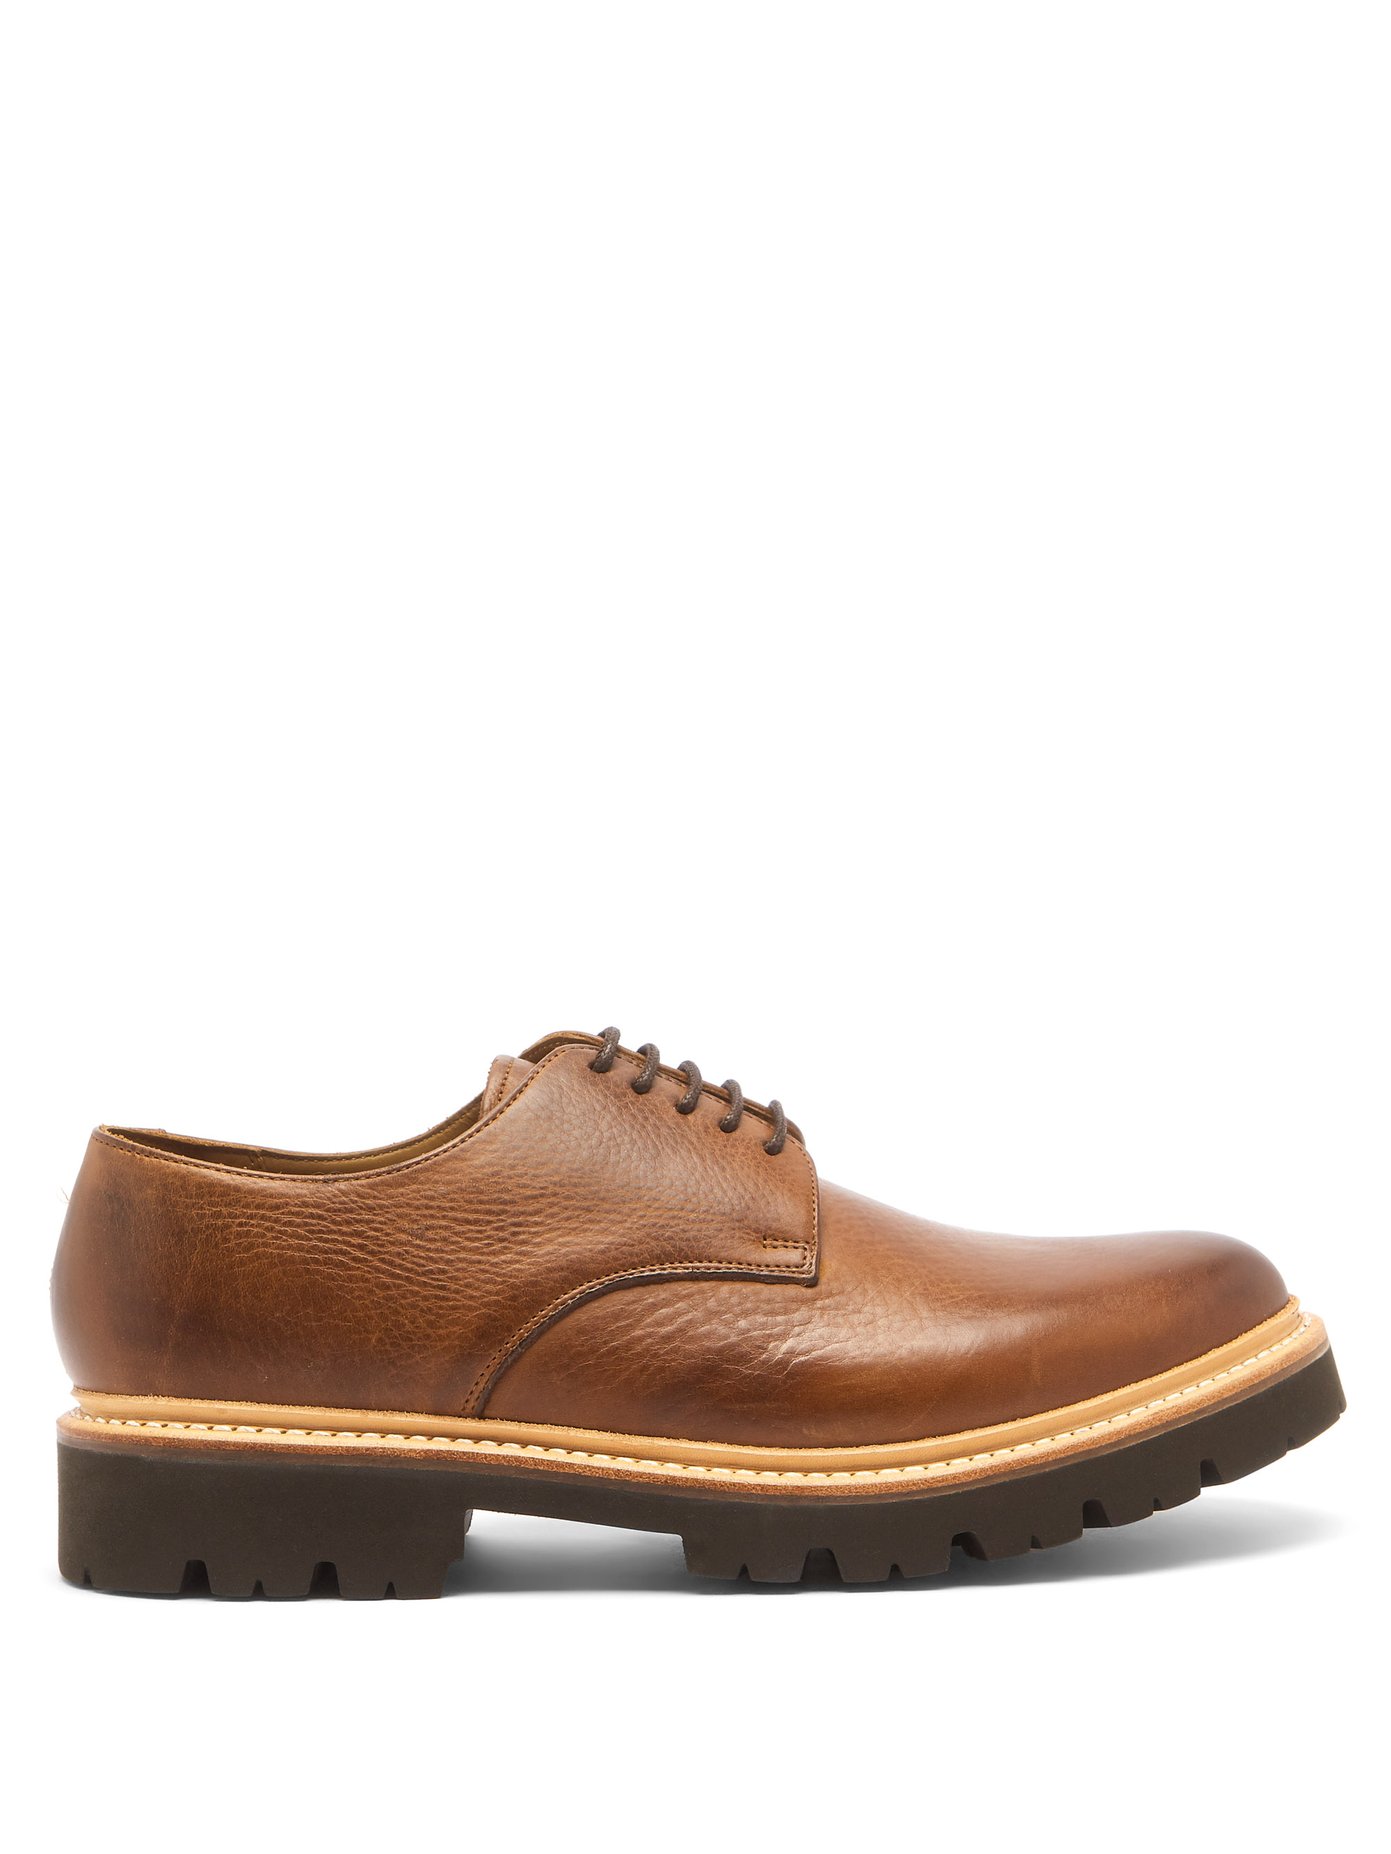 grenson shoes india